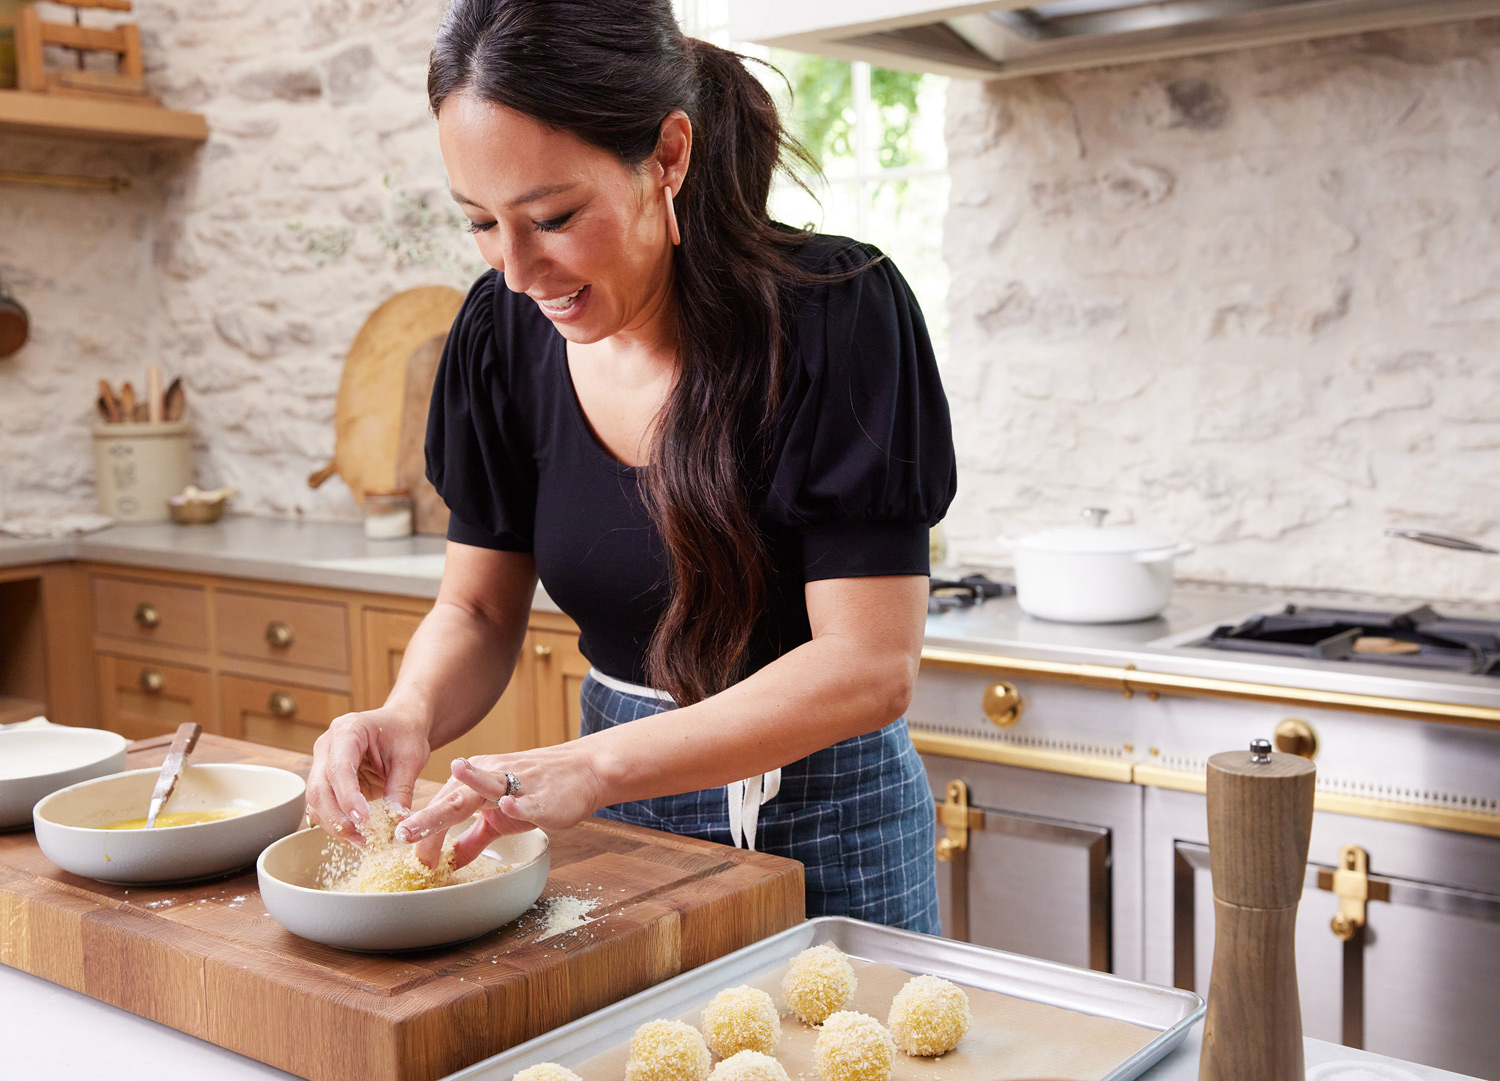 Joanna Gaines of Magnolia Network cooking by lifestyle photographer Buff Strickland